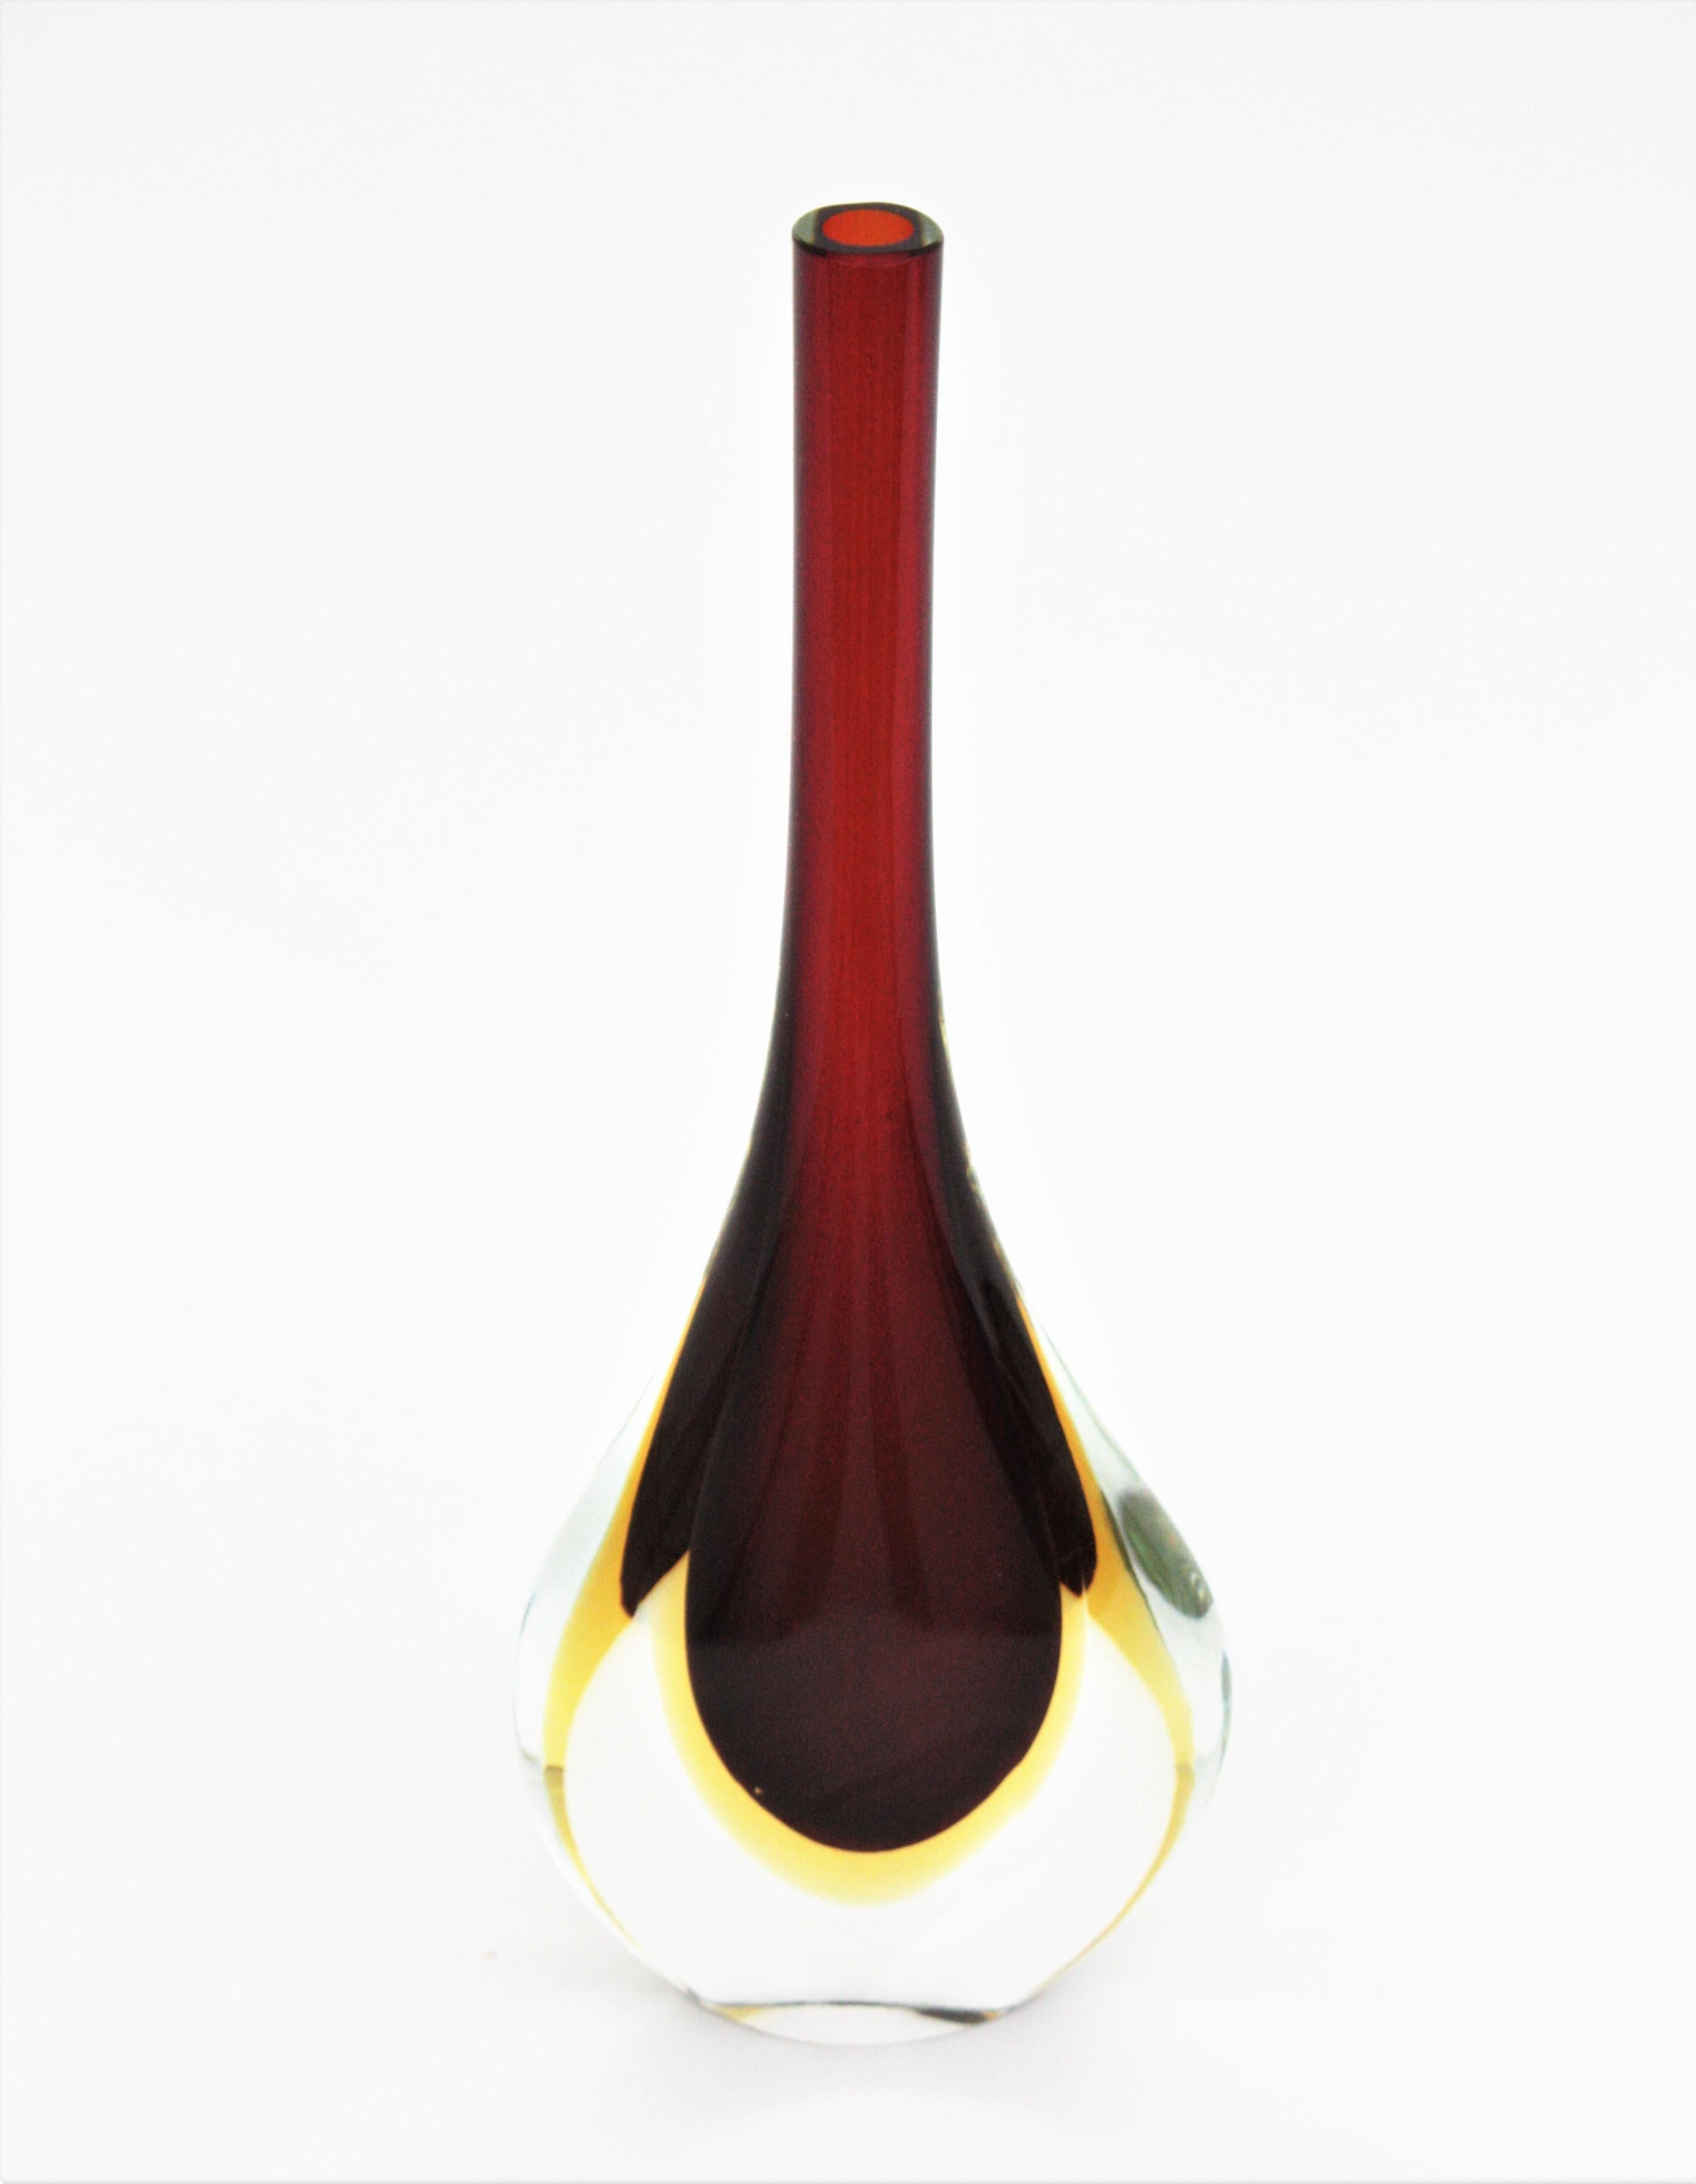 Mid-Century Modern Flavio Poli Seguso Murano Sommerso Red, Yellow & Clear Glass Teardrop Tall Vase For Sale